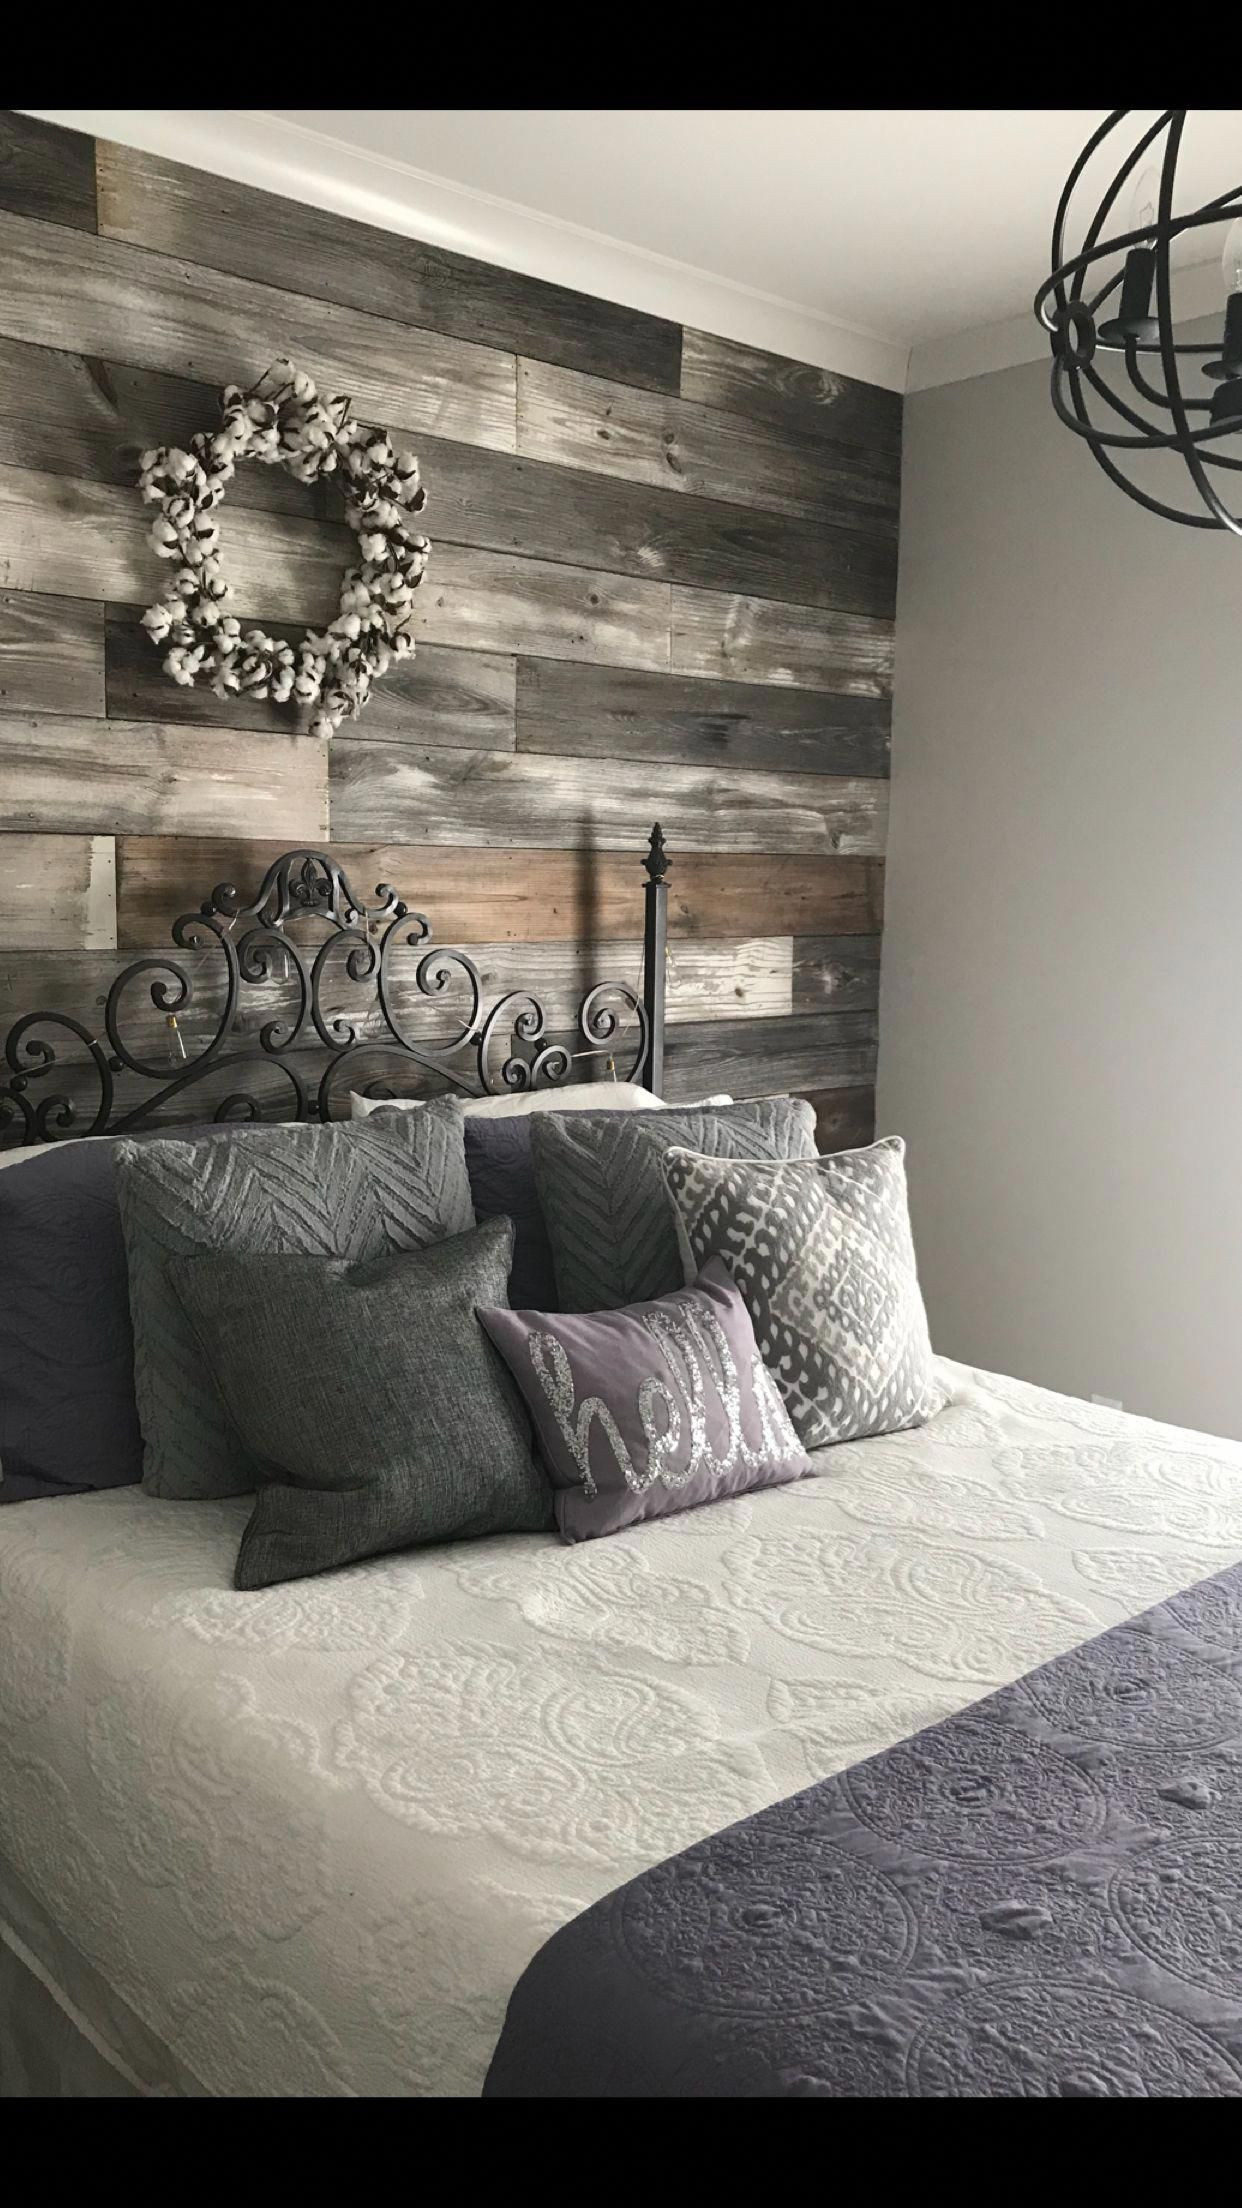 Shiplap Accent Wall Bedroom
 Repurposed shiplap accent wall Bedrooms in 2019